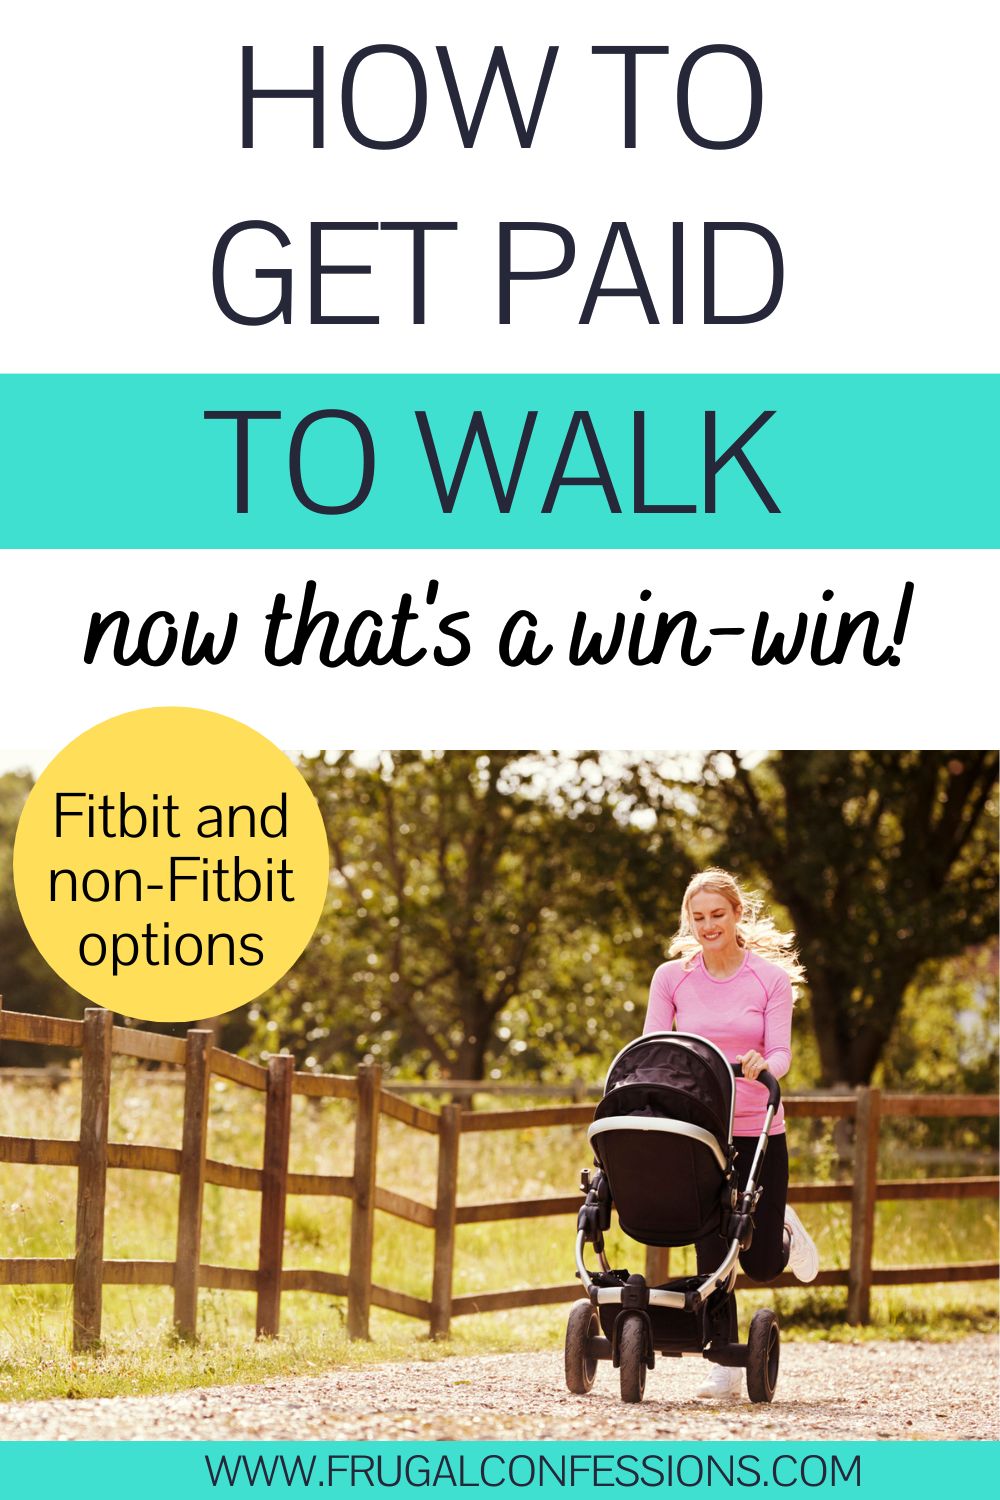 mom in pink shirt smiling looking at baby in stroller, text overlay "how to get paid to walk fitbit and non-fitbit options"